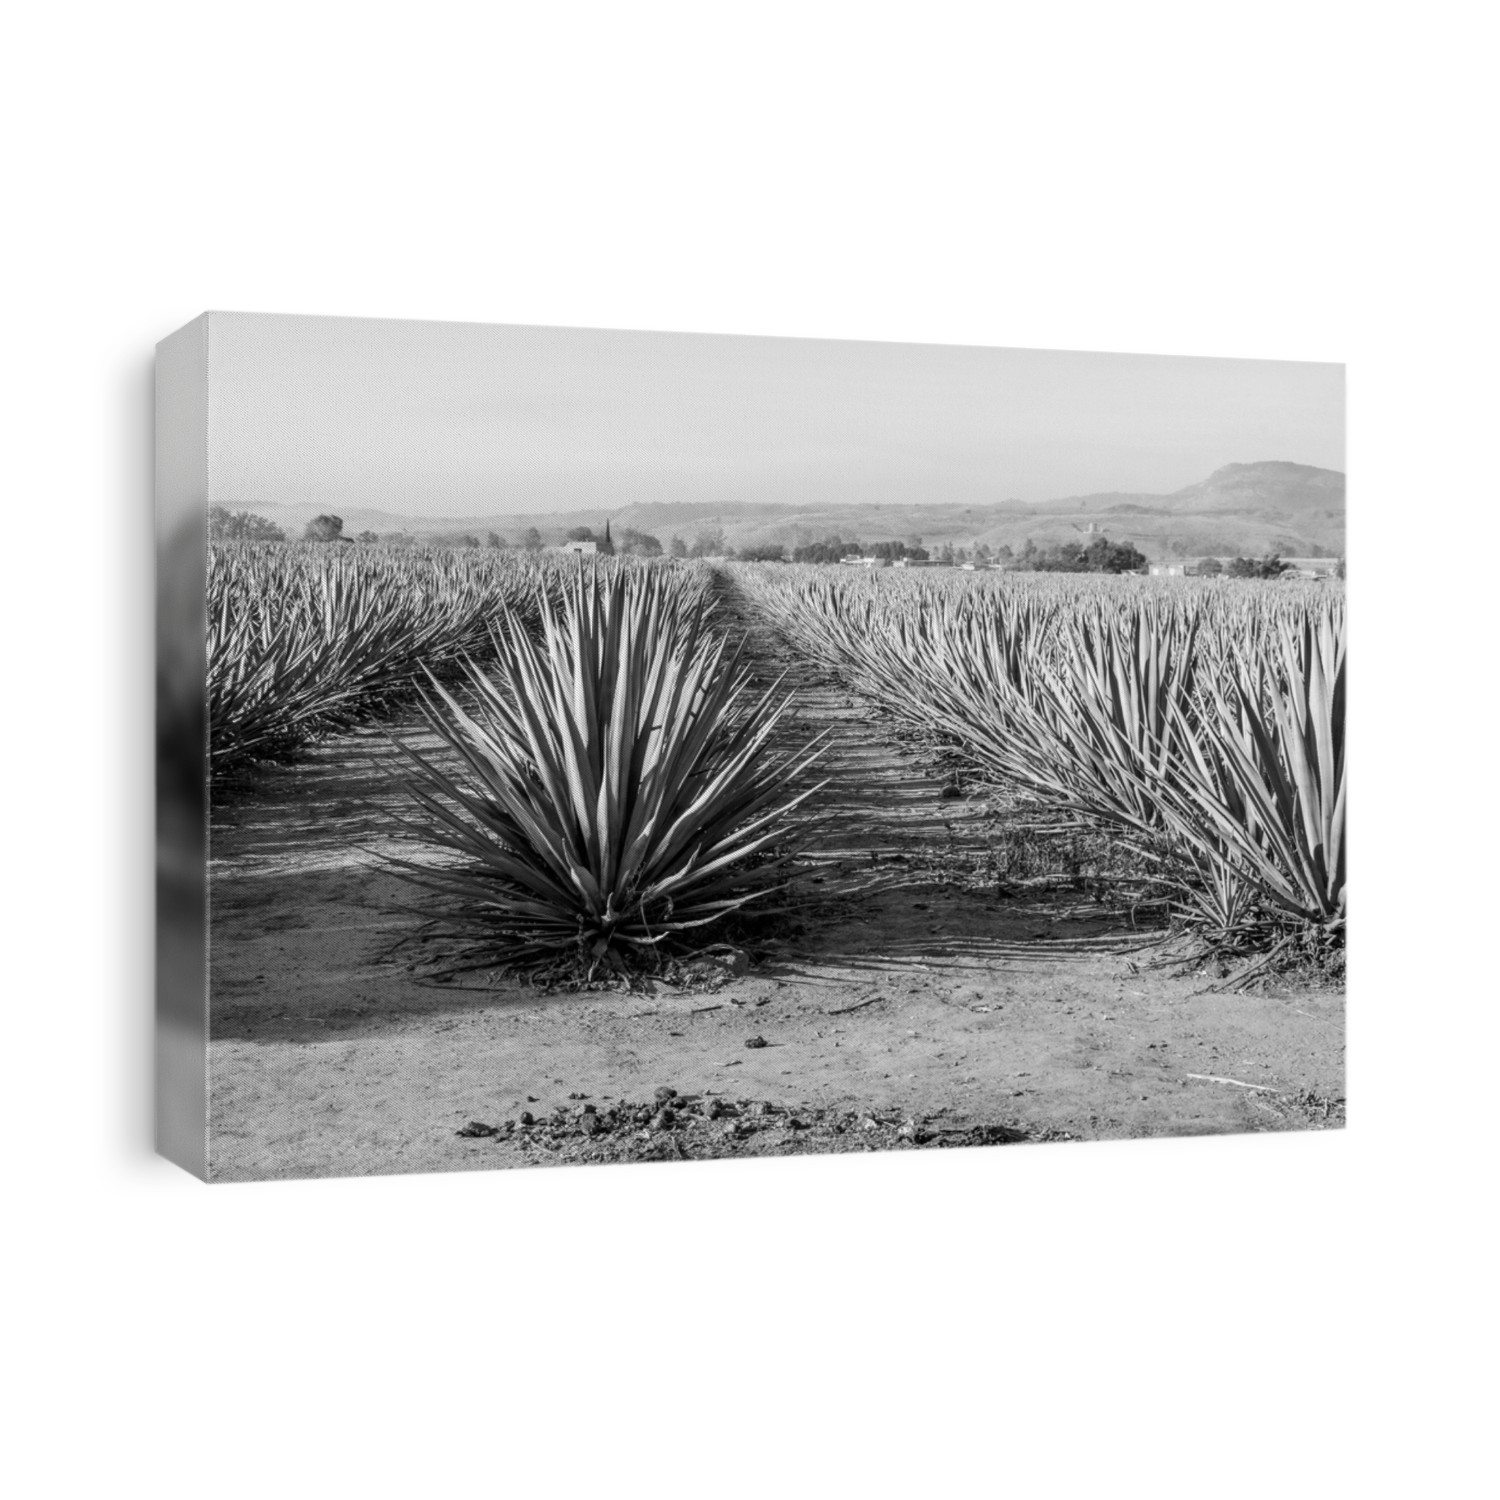 Landscape of agave plants to produce tequila. Mexico. Black and white.